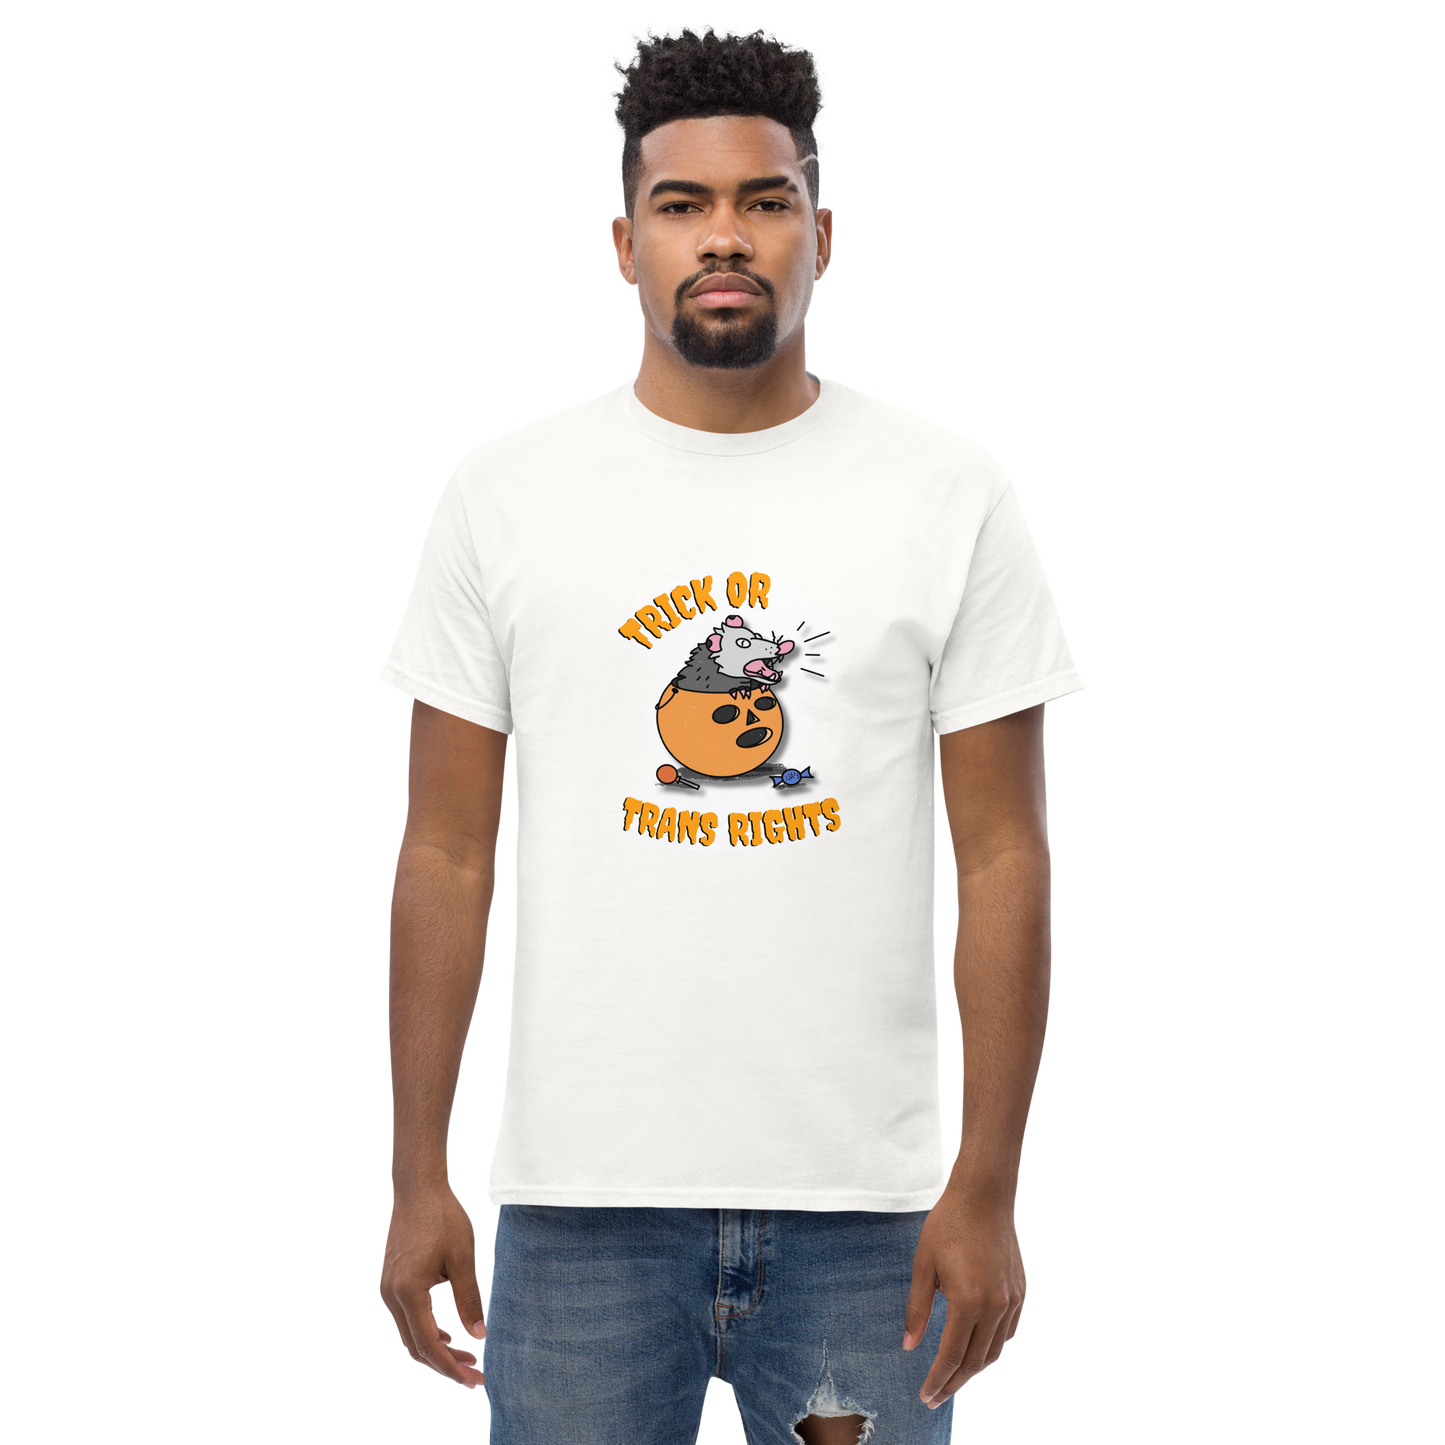 This design features a possum in an orange plastic candy bucket with the text "Trick or Transphobia"  on a white t-shirt. This image is the shirt design on a standard sized model.